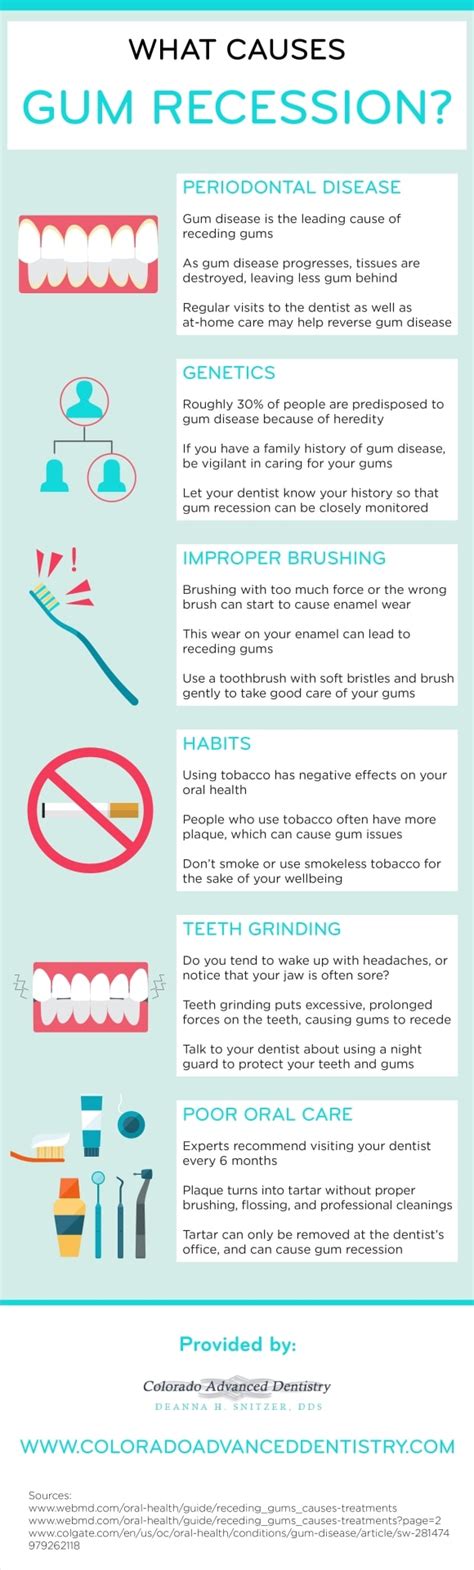 Causes Of Gum Recession By Colorado Advanced Dentistry